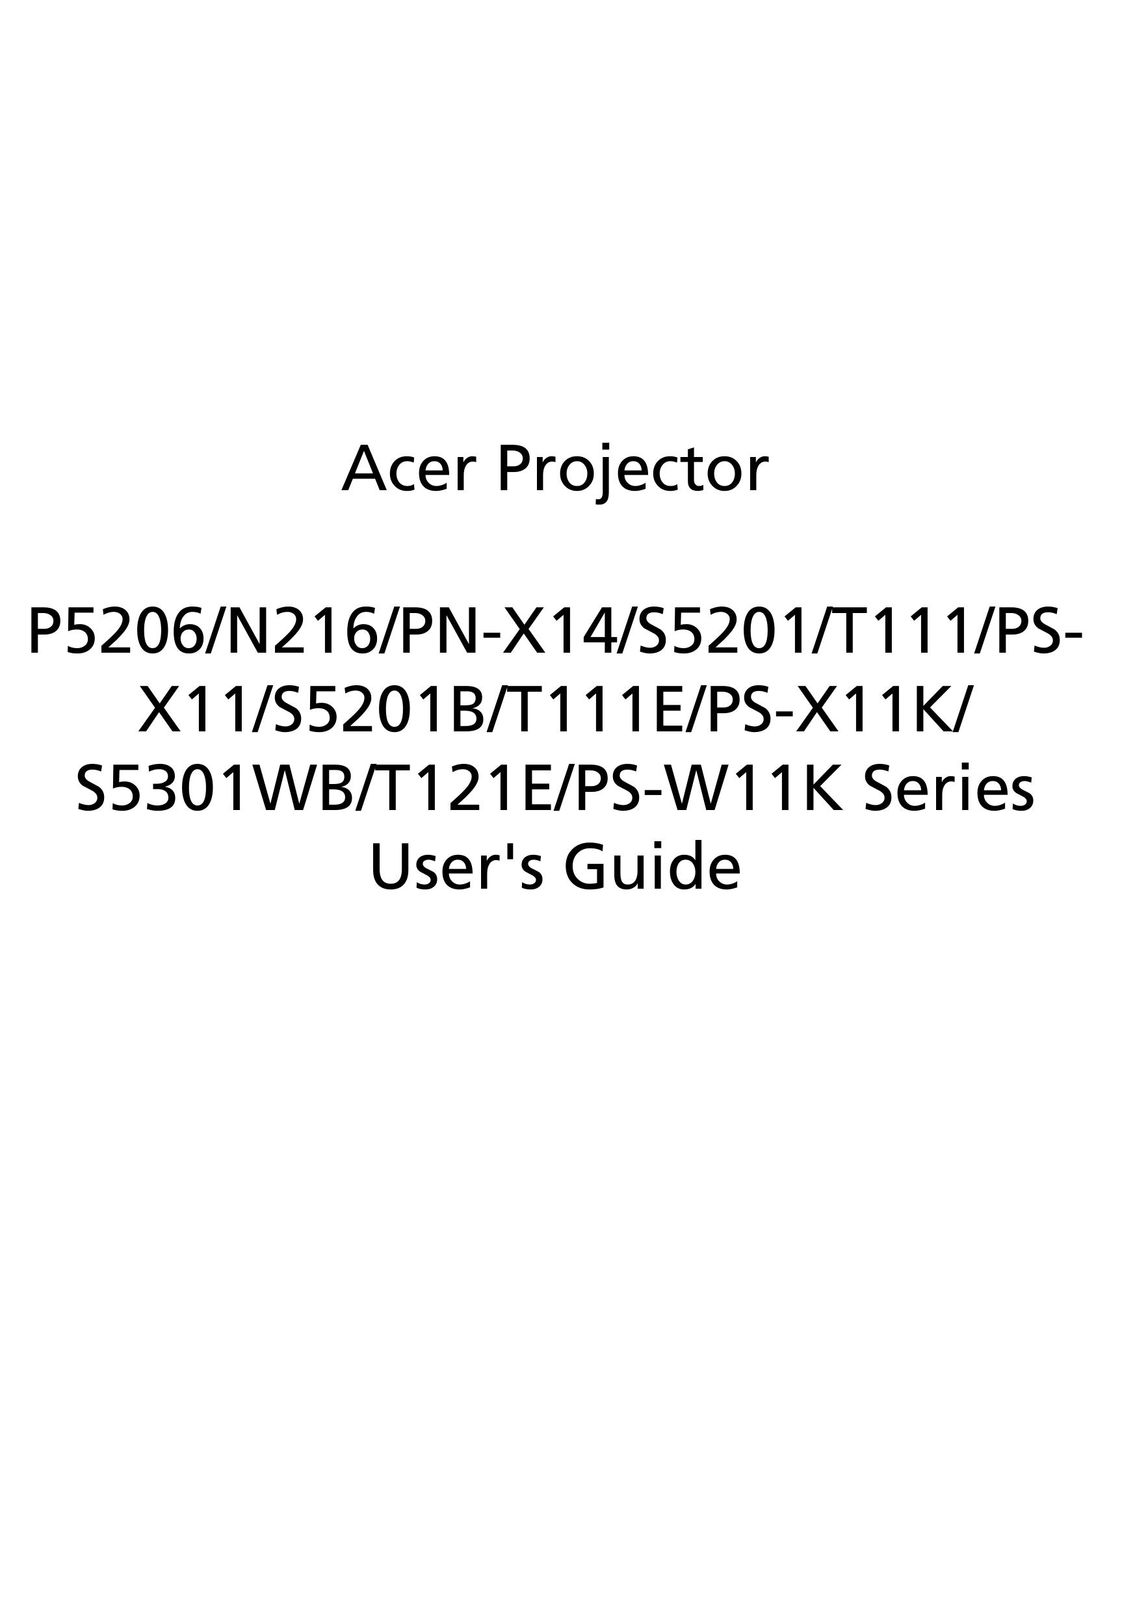 Acer N216 Projector User Manual